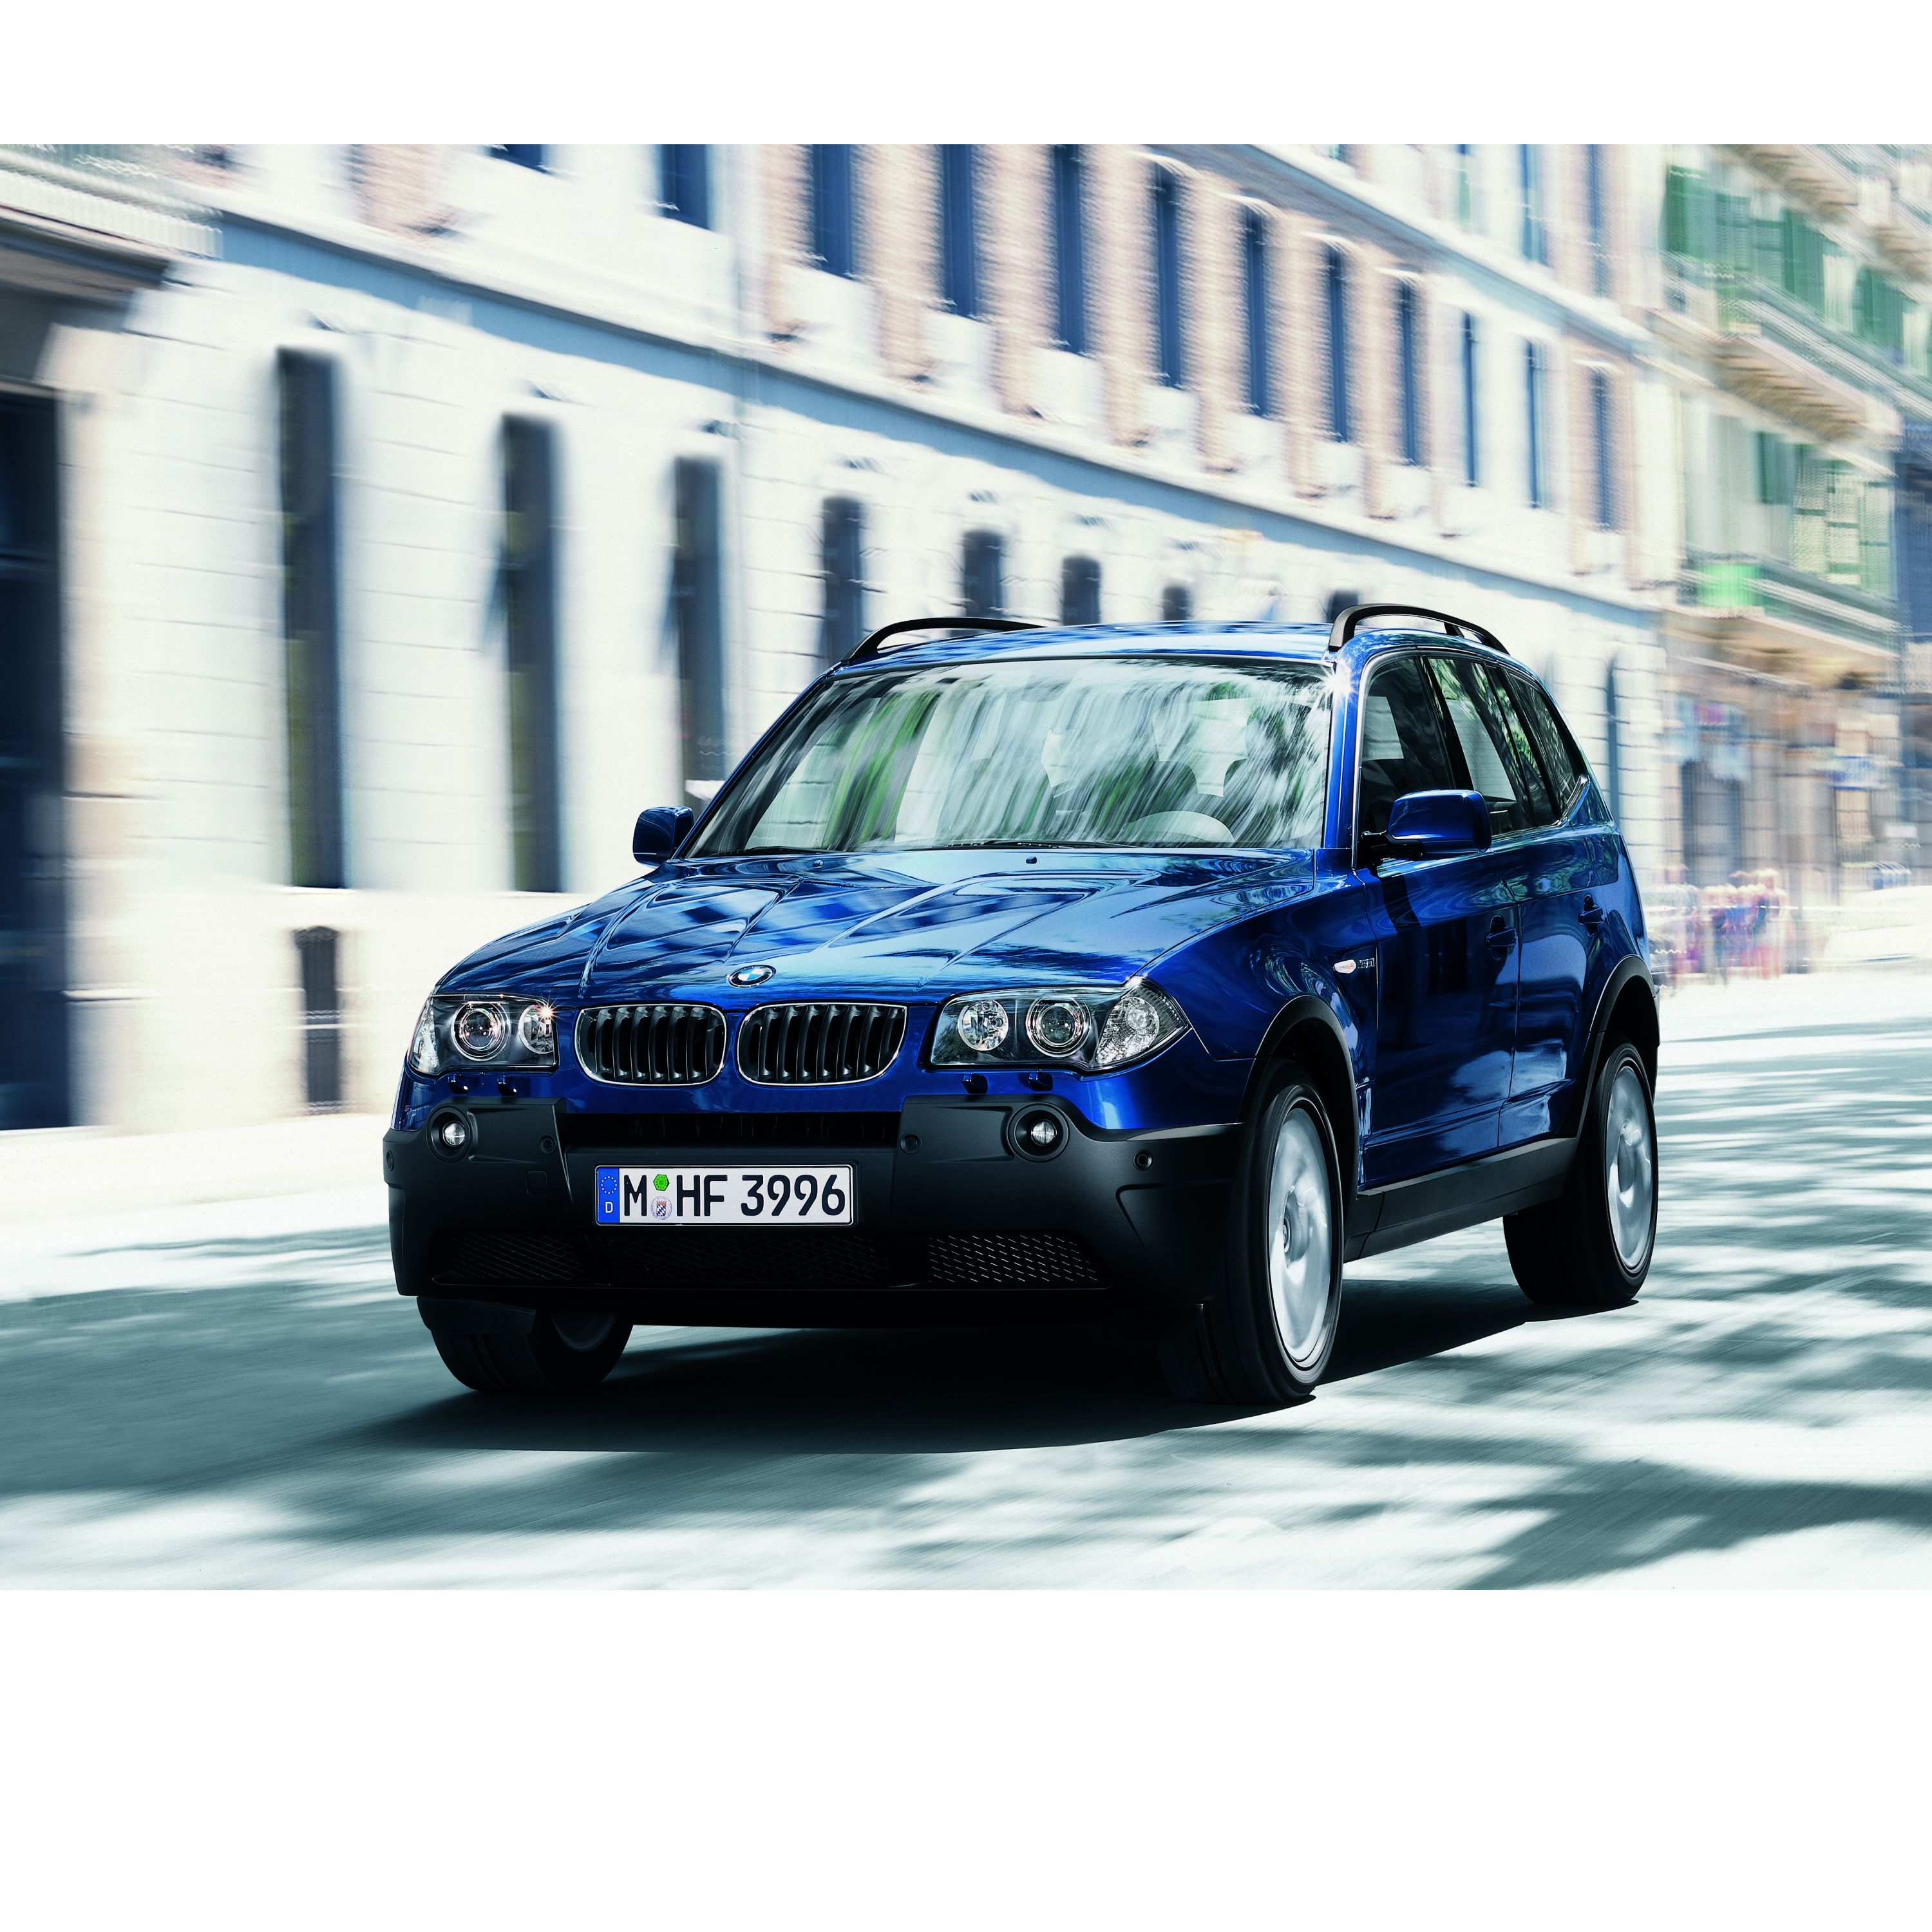 BMW X3 E83 SUV on a road in front of a historic European city center backdrop